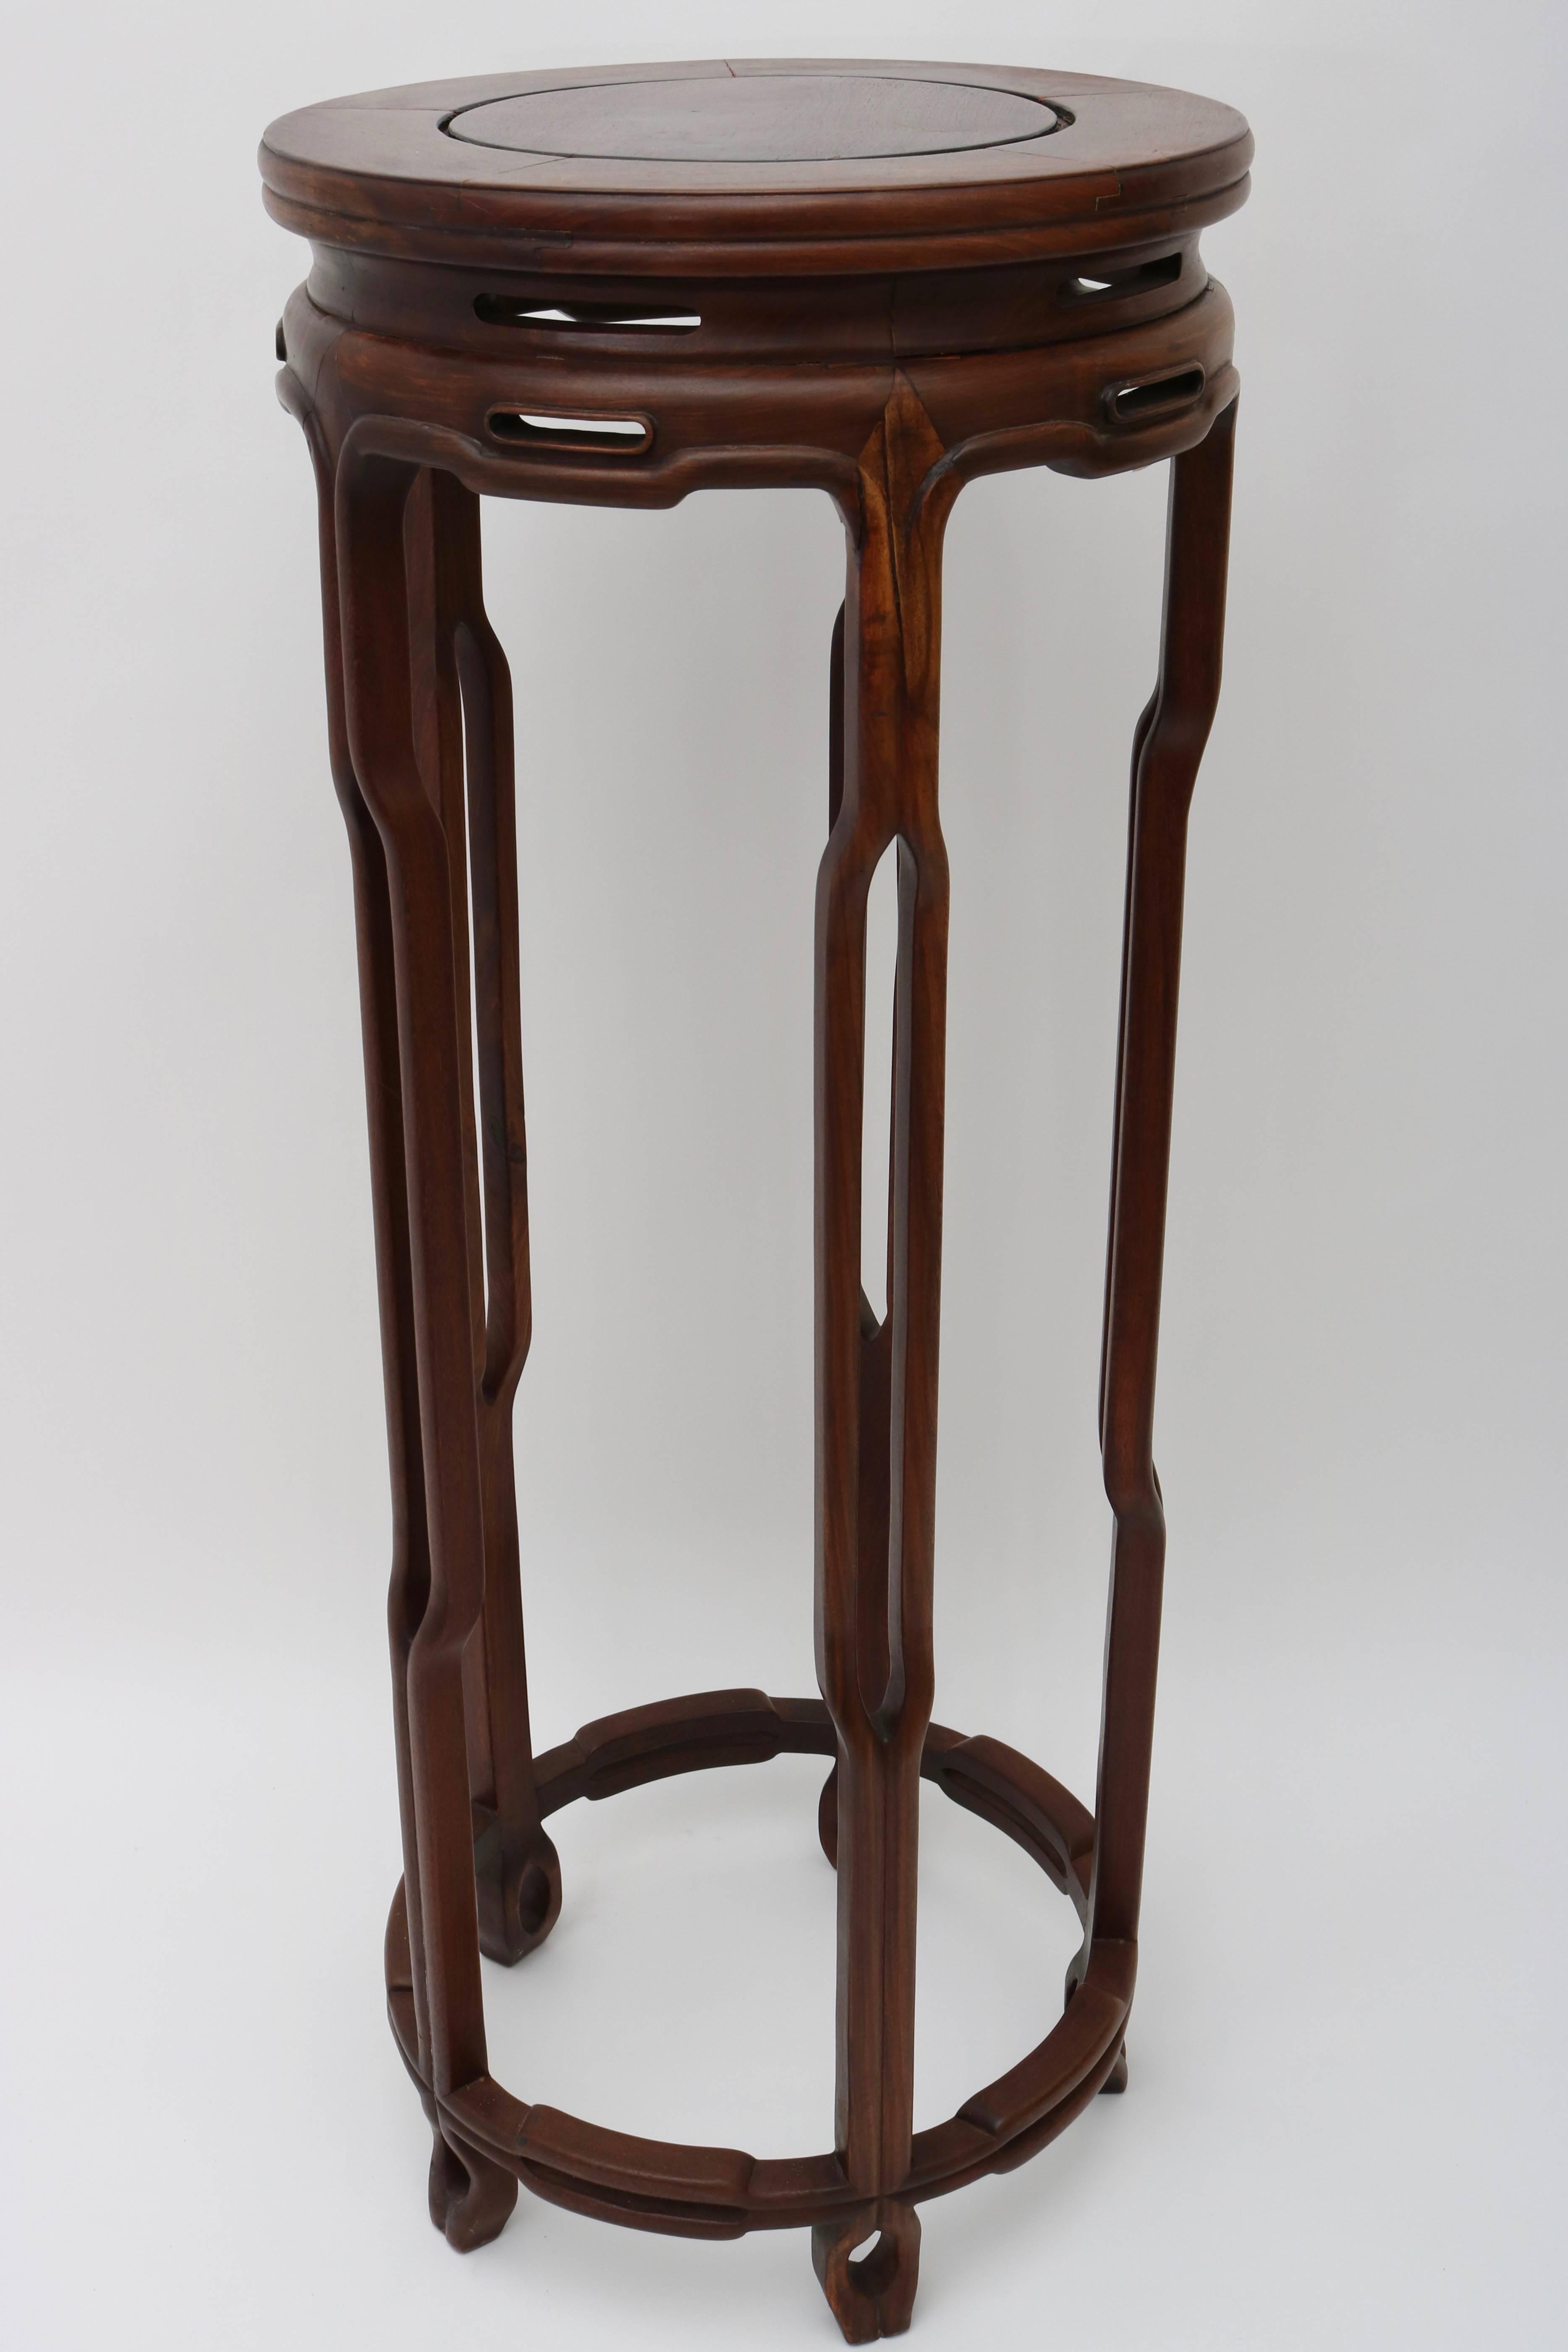 This stylish pedestal dates to the 1940s and will make the perfect perch for piece porcelain or perhaps and cache pot of orchids.

For best net trade price or additional questions regarding this item, please click the 